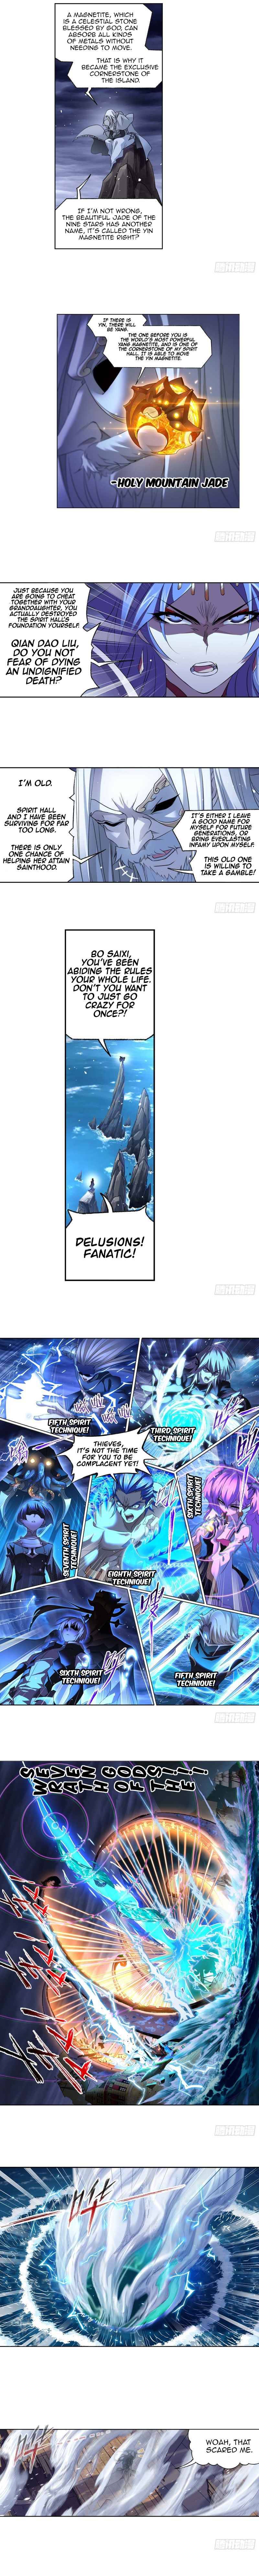 Douluo Dalu Chapter 289